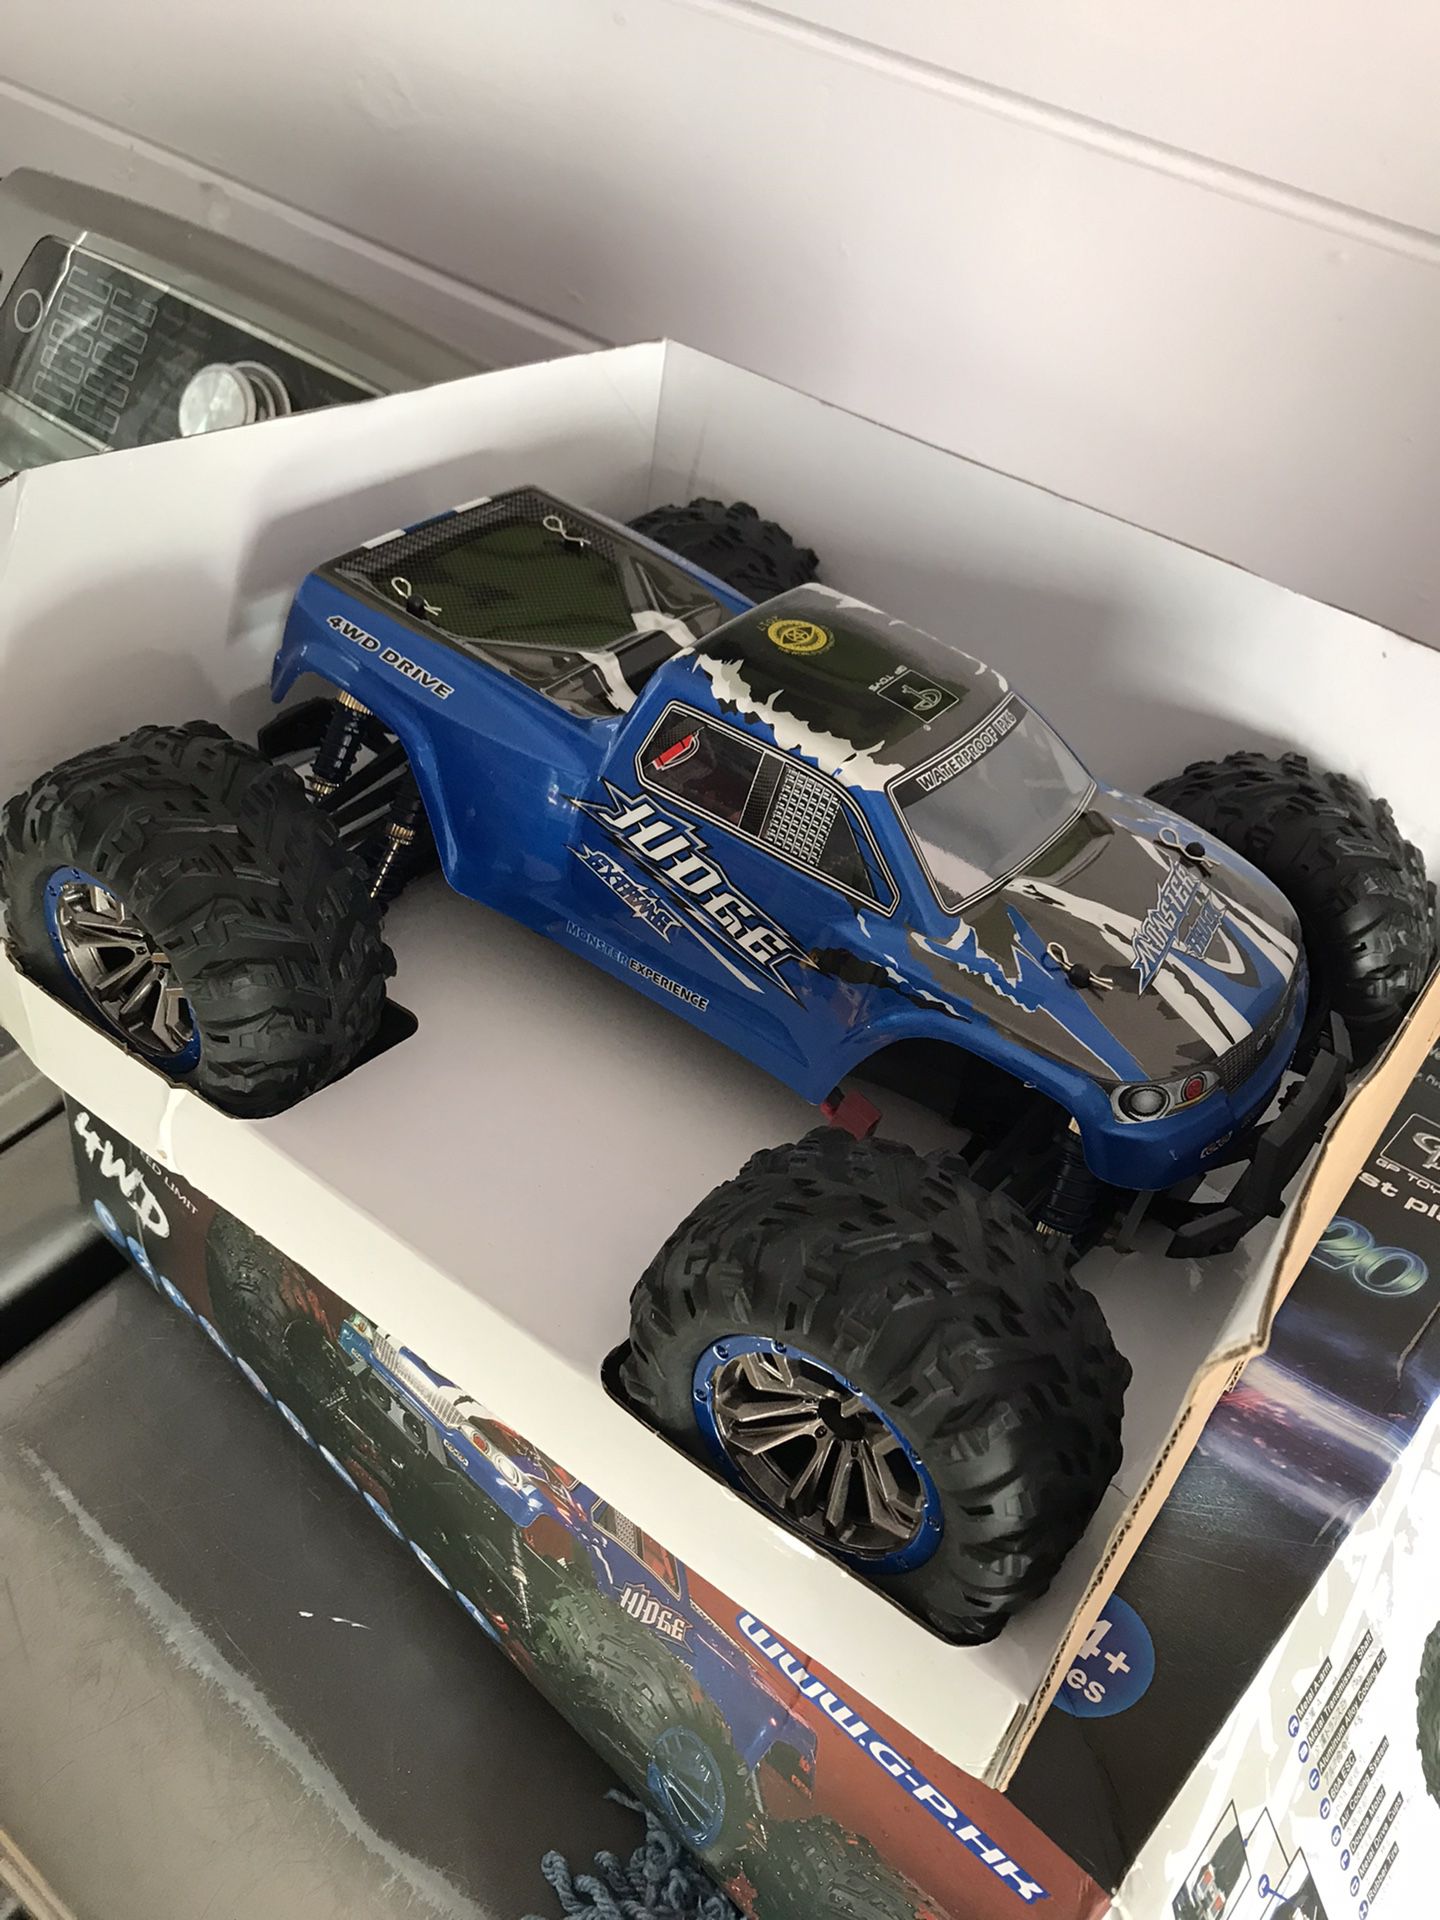 Brand New 4wd Rc S920